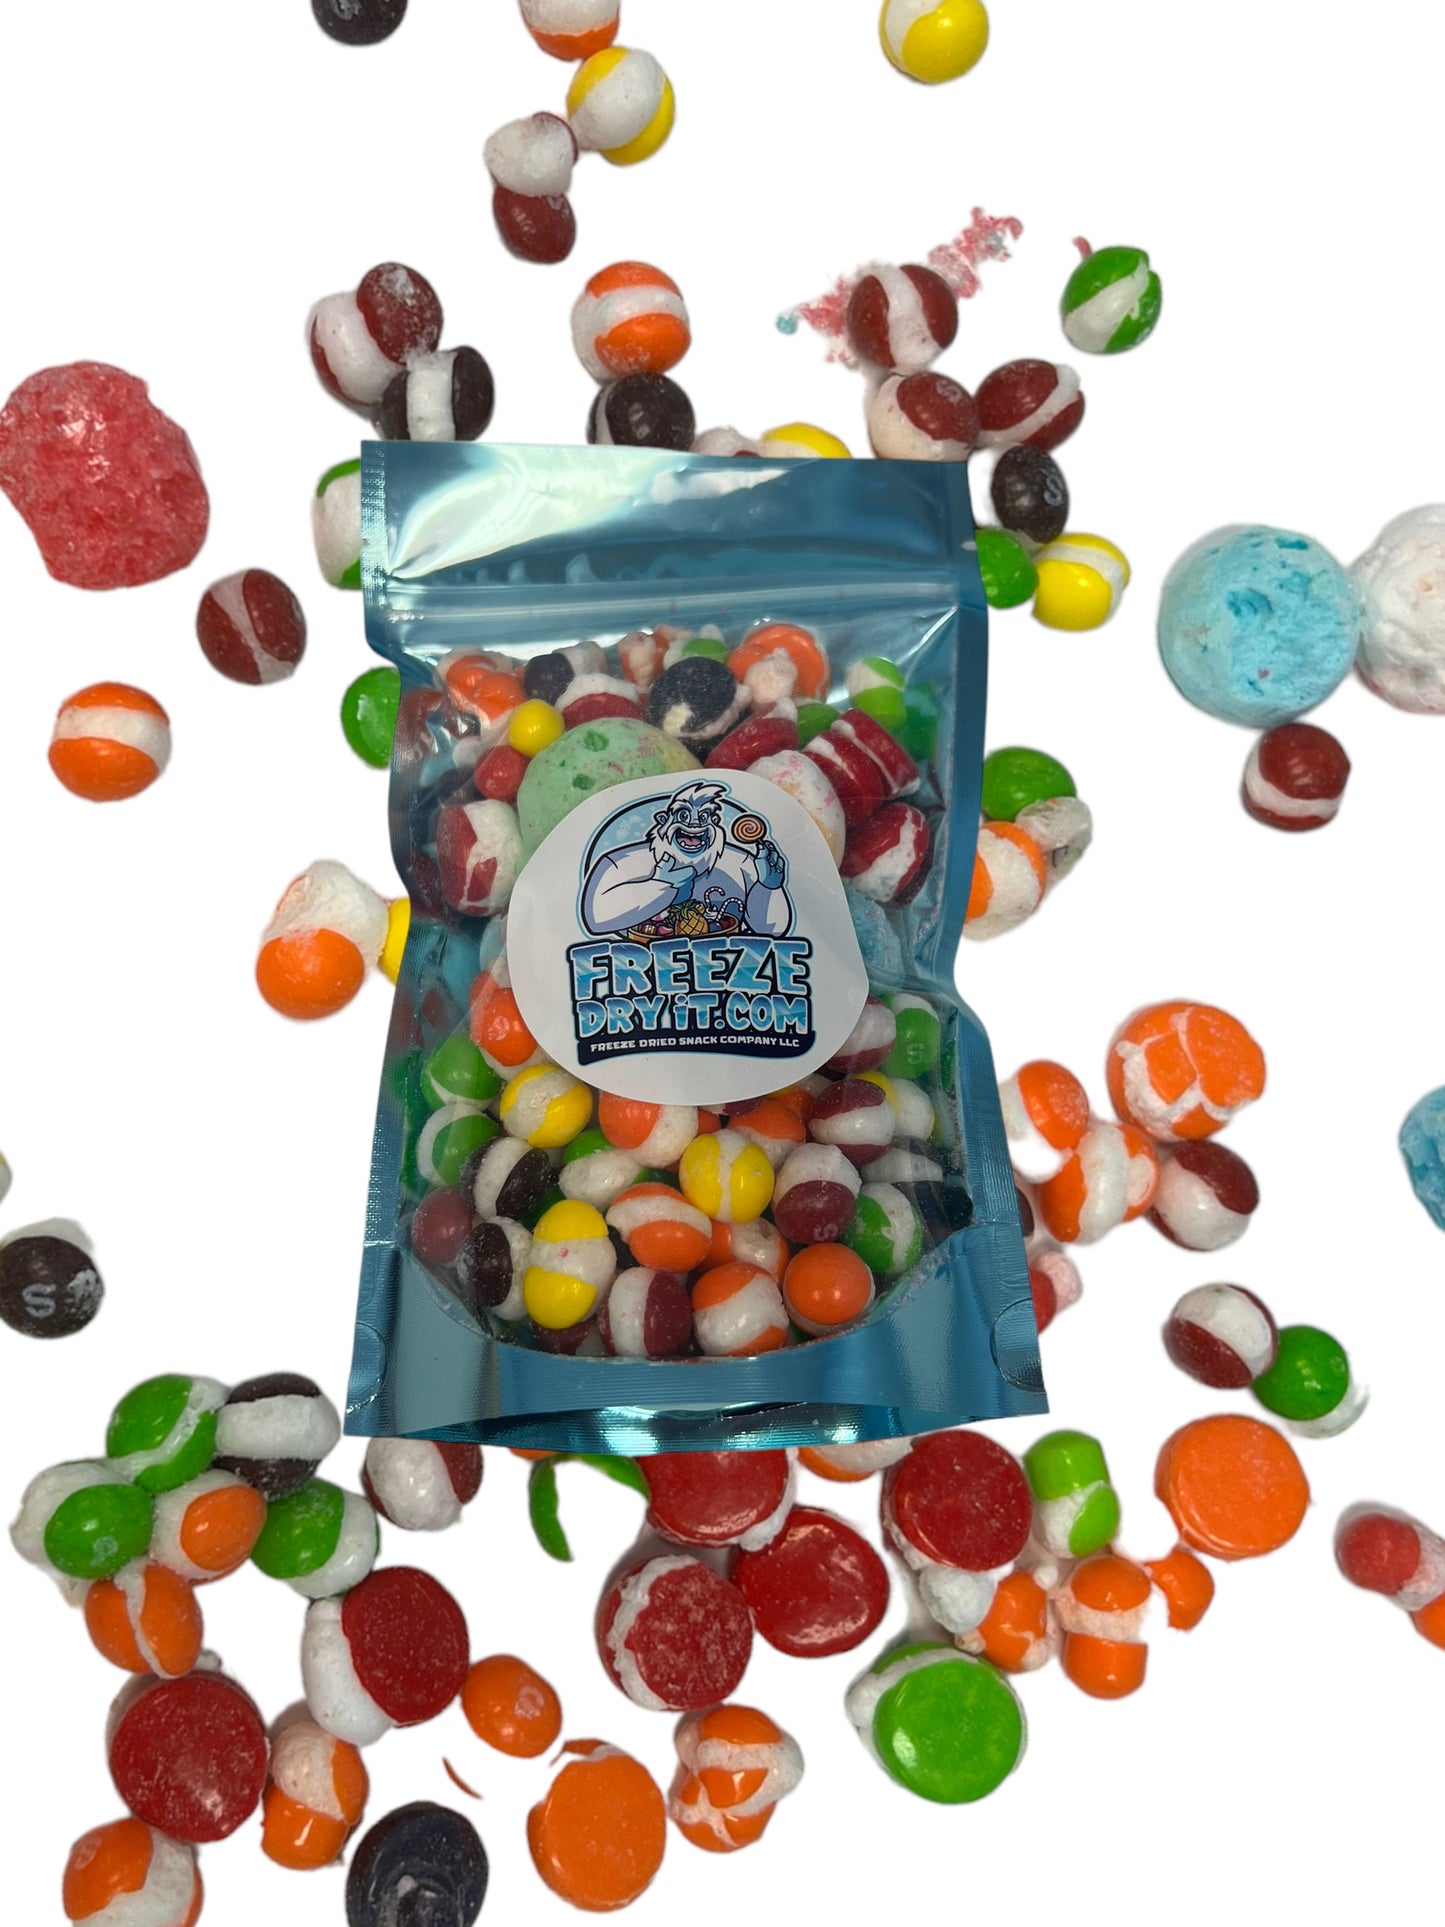 What Is Freeze Dried Candy & How to Freeze Dry Candy